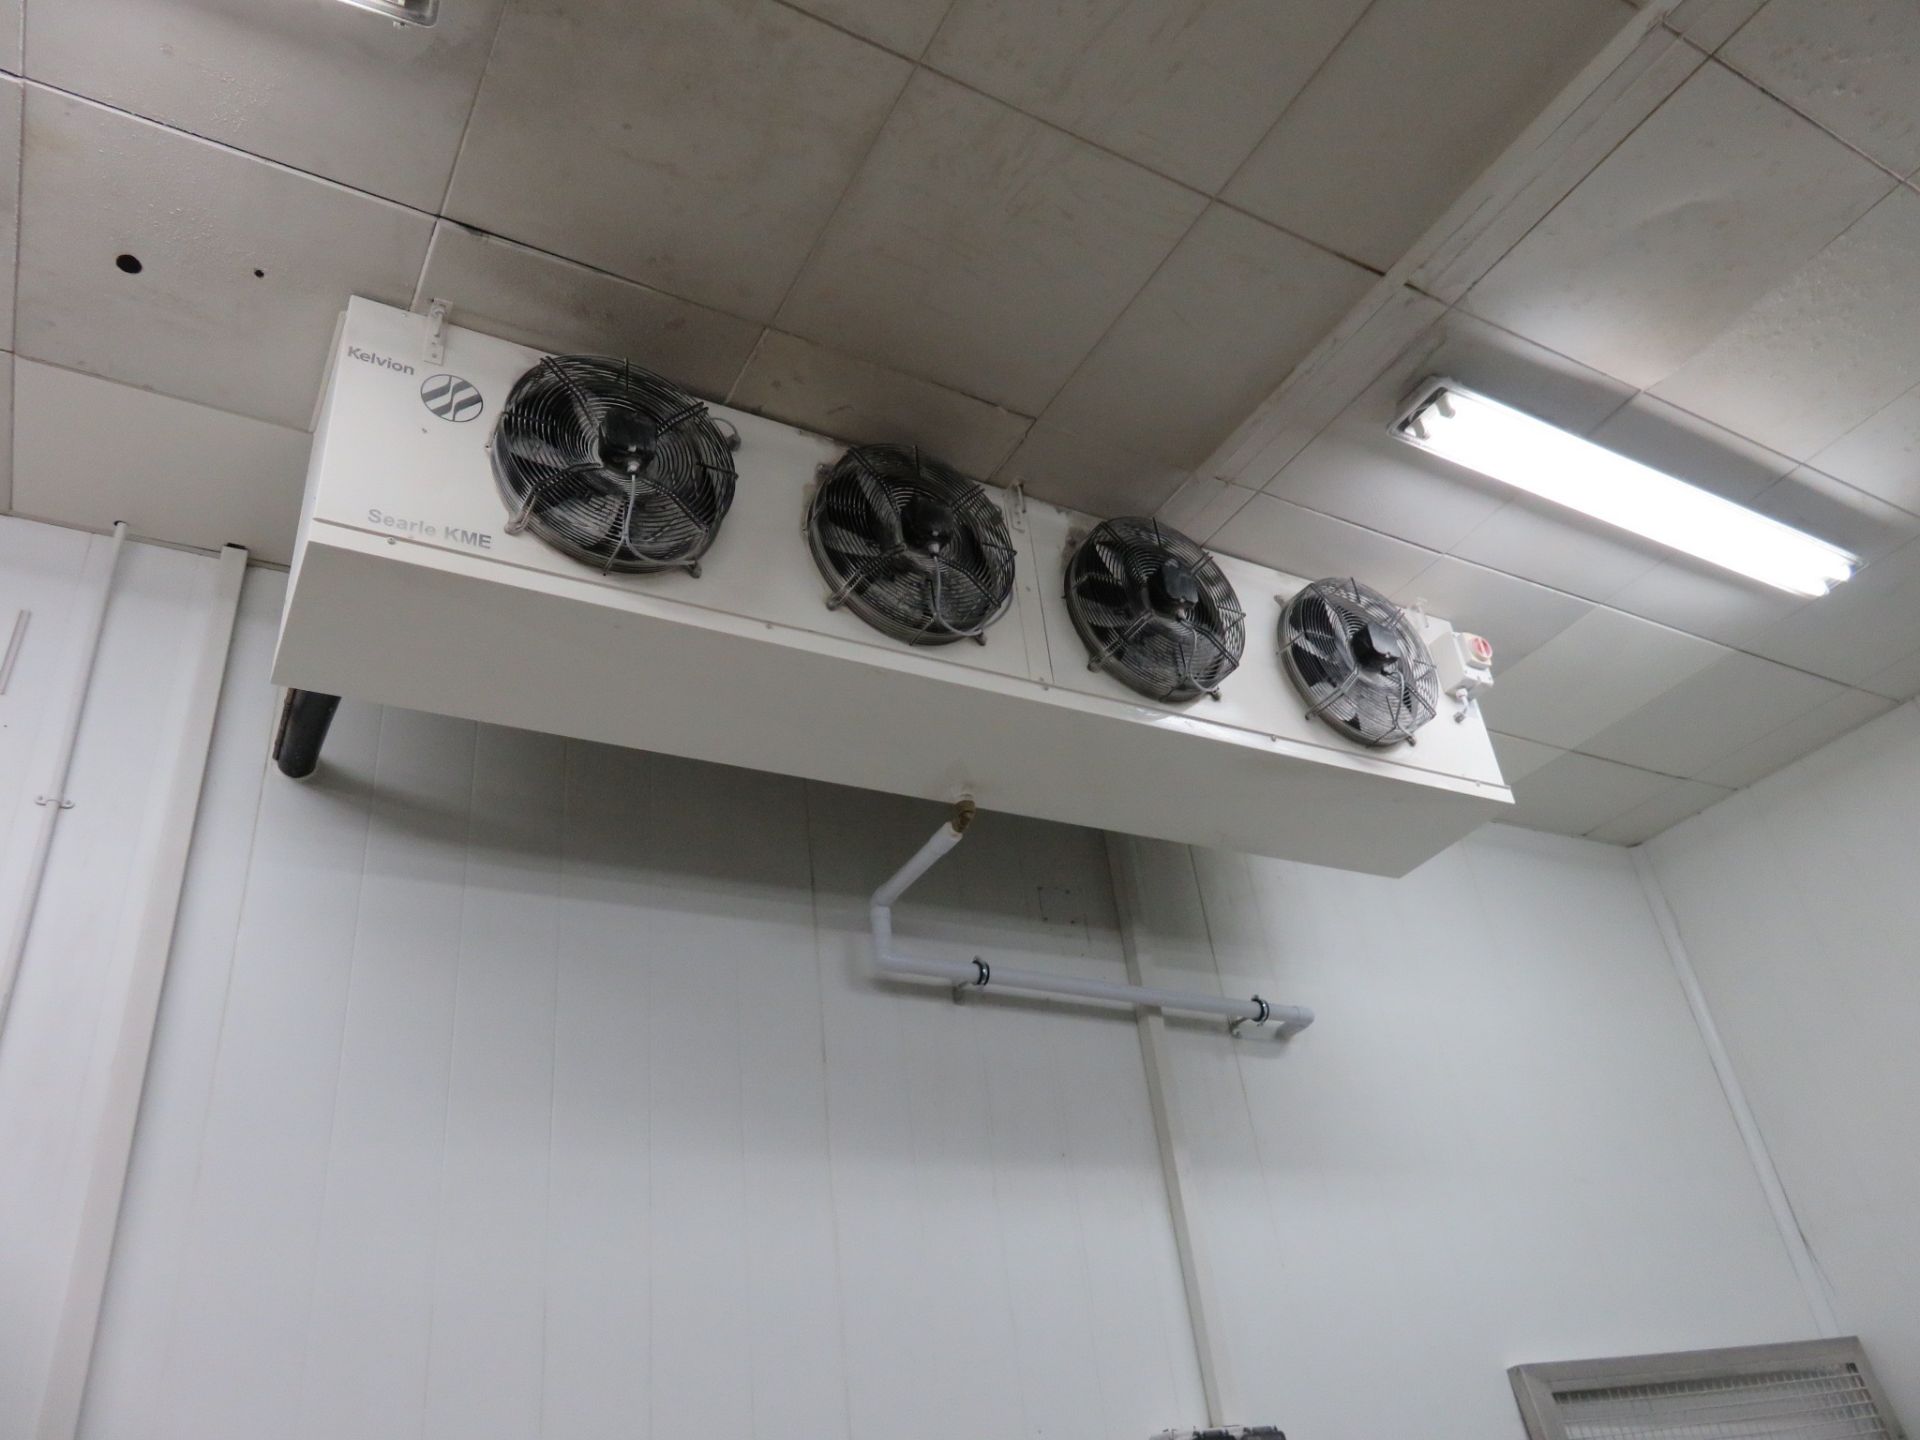 5 x Searle KME 4 Fan Evaporators. lift out charge £350 - Image 2 of 2